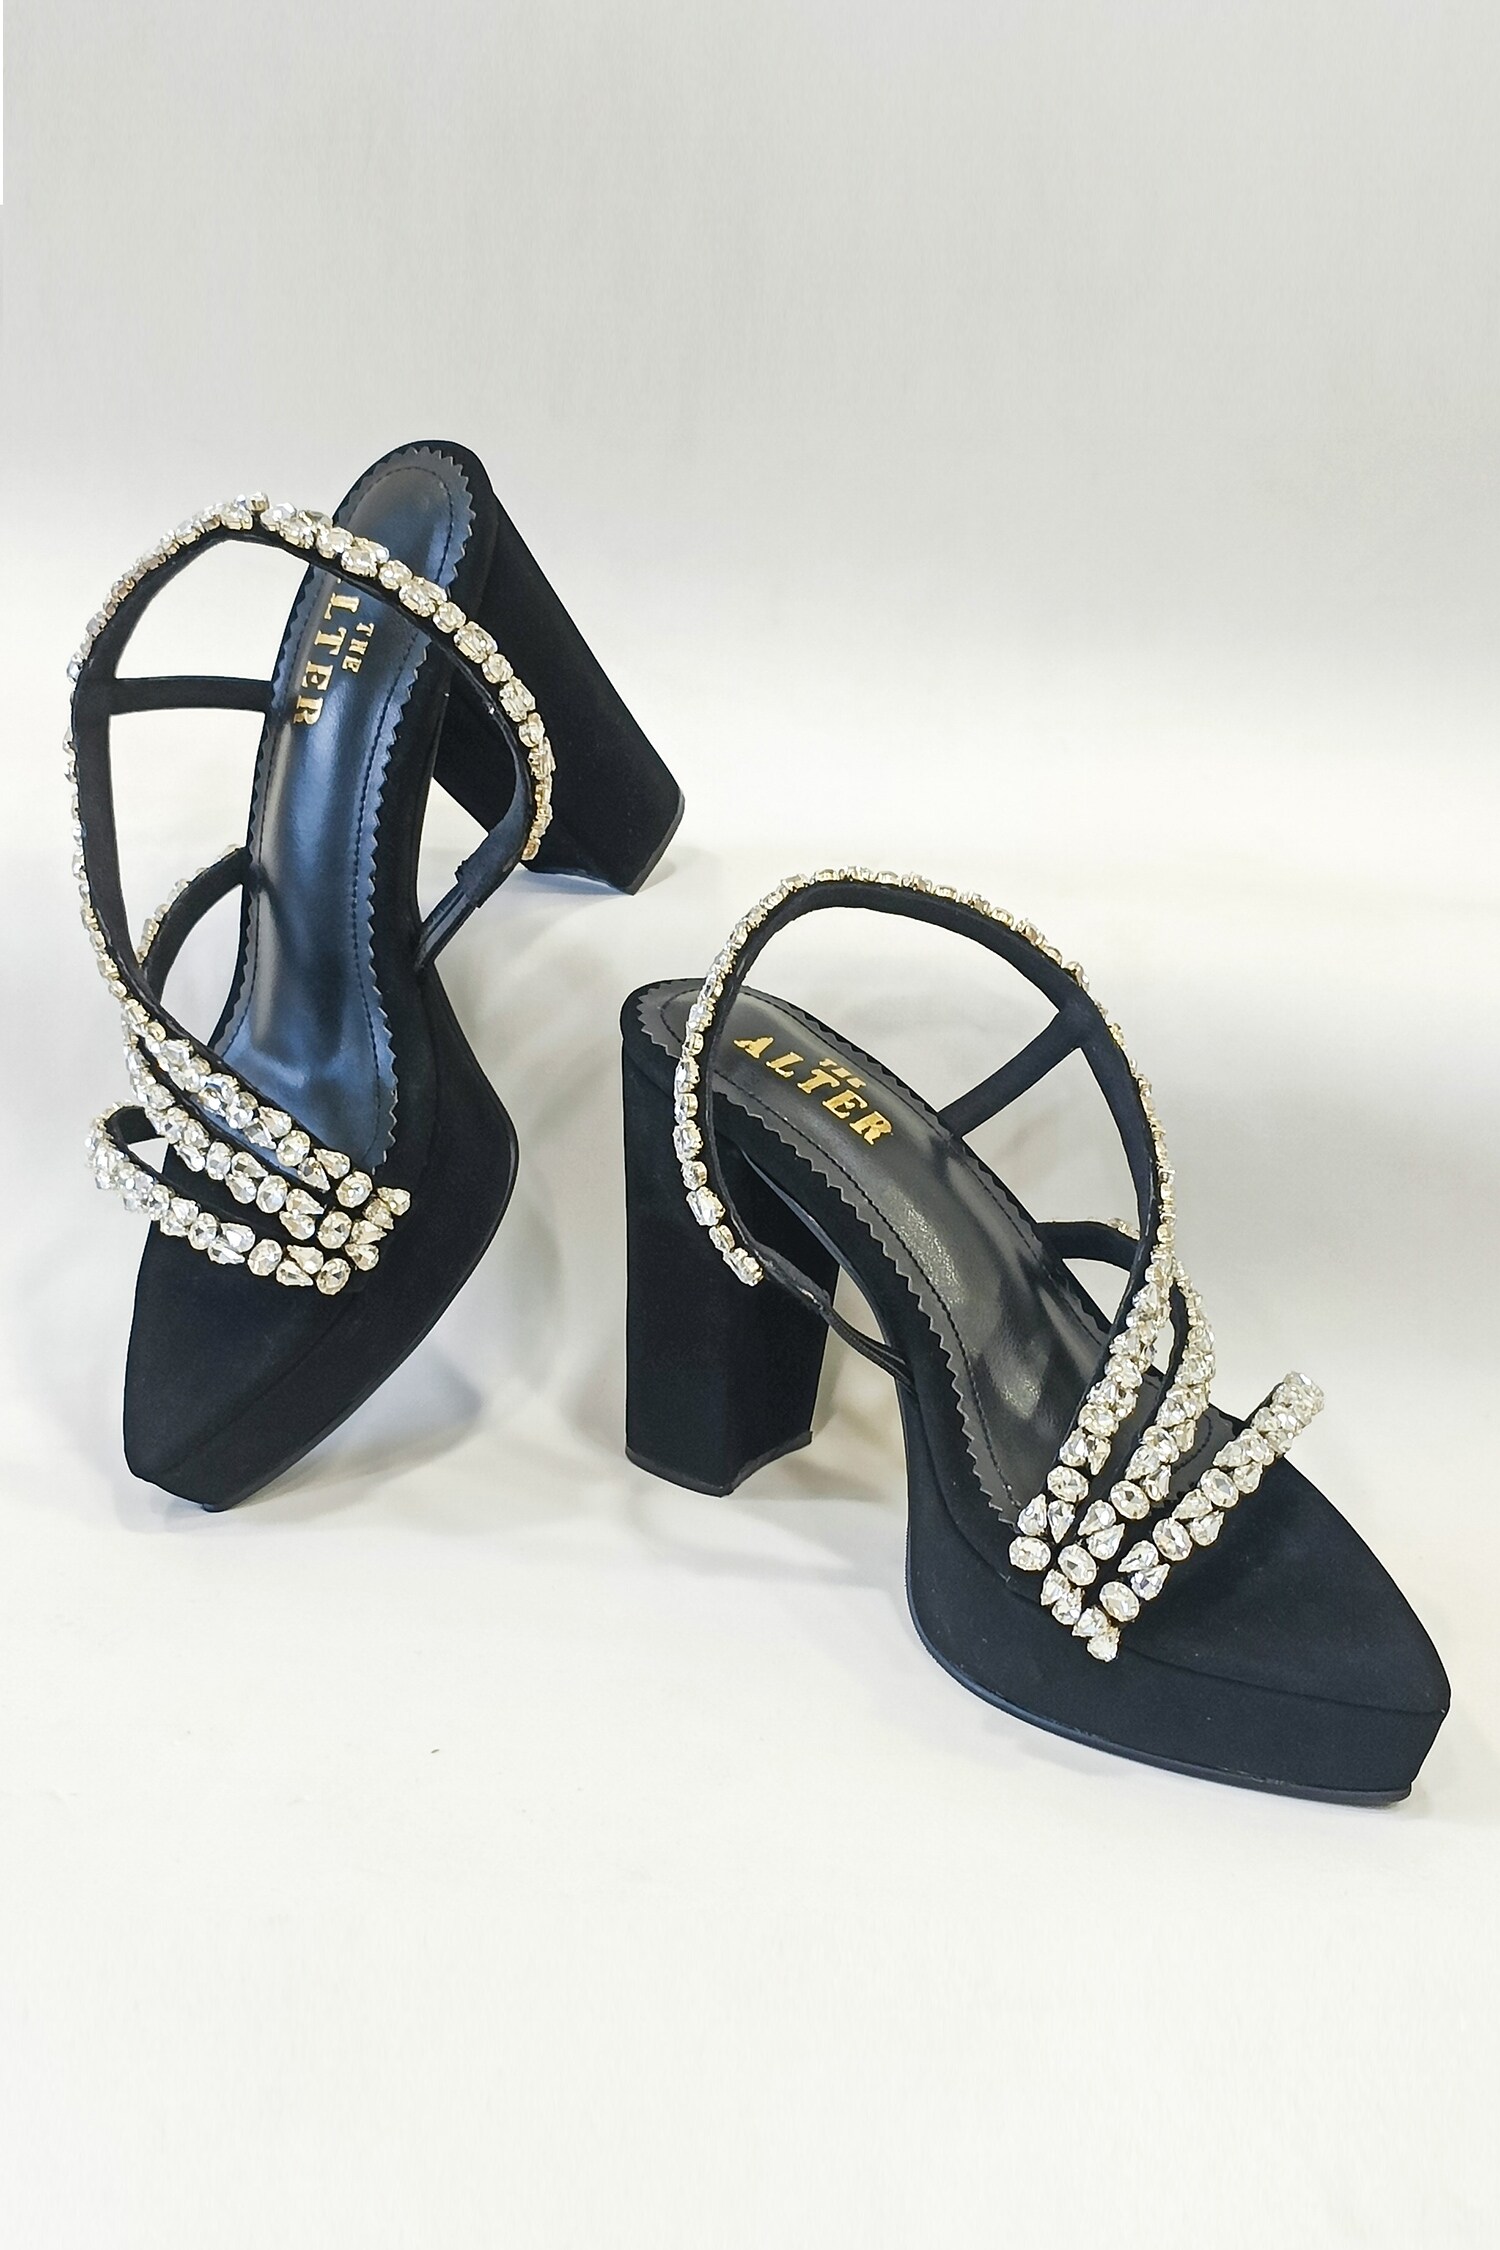 CHANEL, Shoes, Authentic Chanel Pearl Beaded Wedges